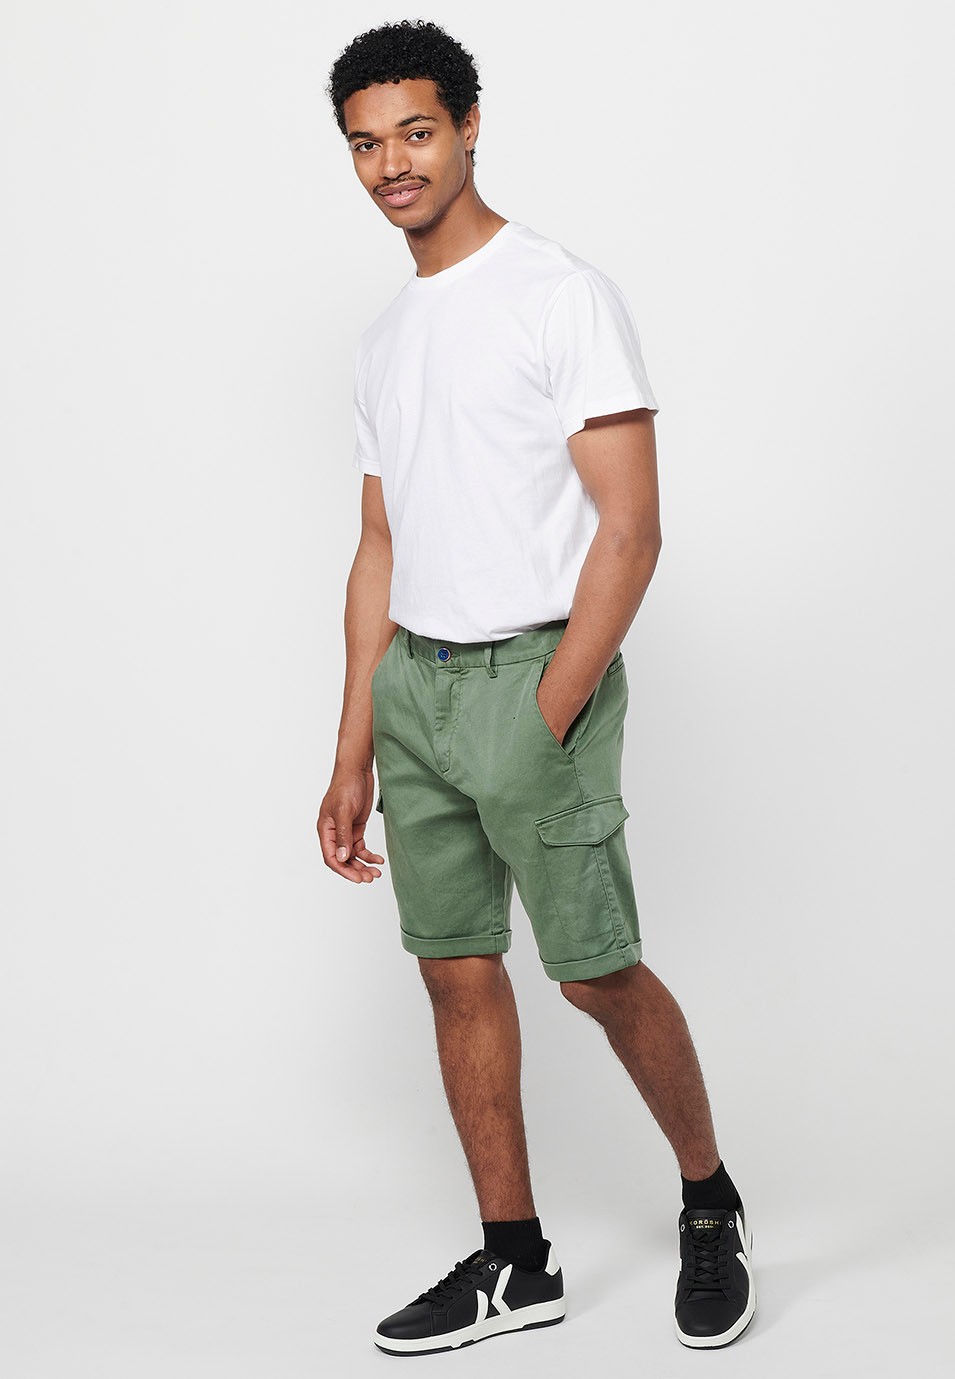 Shorts with rubberized waist and zipper and button closure with pockets, two sides with flap in Green for Men